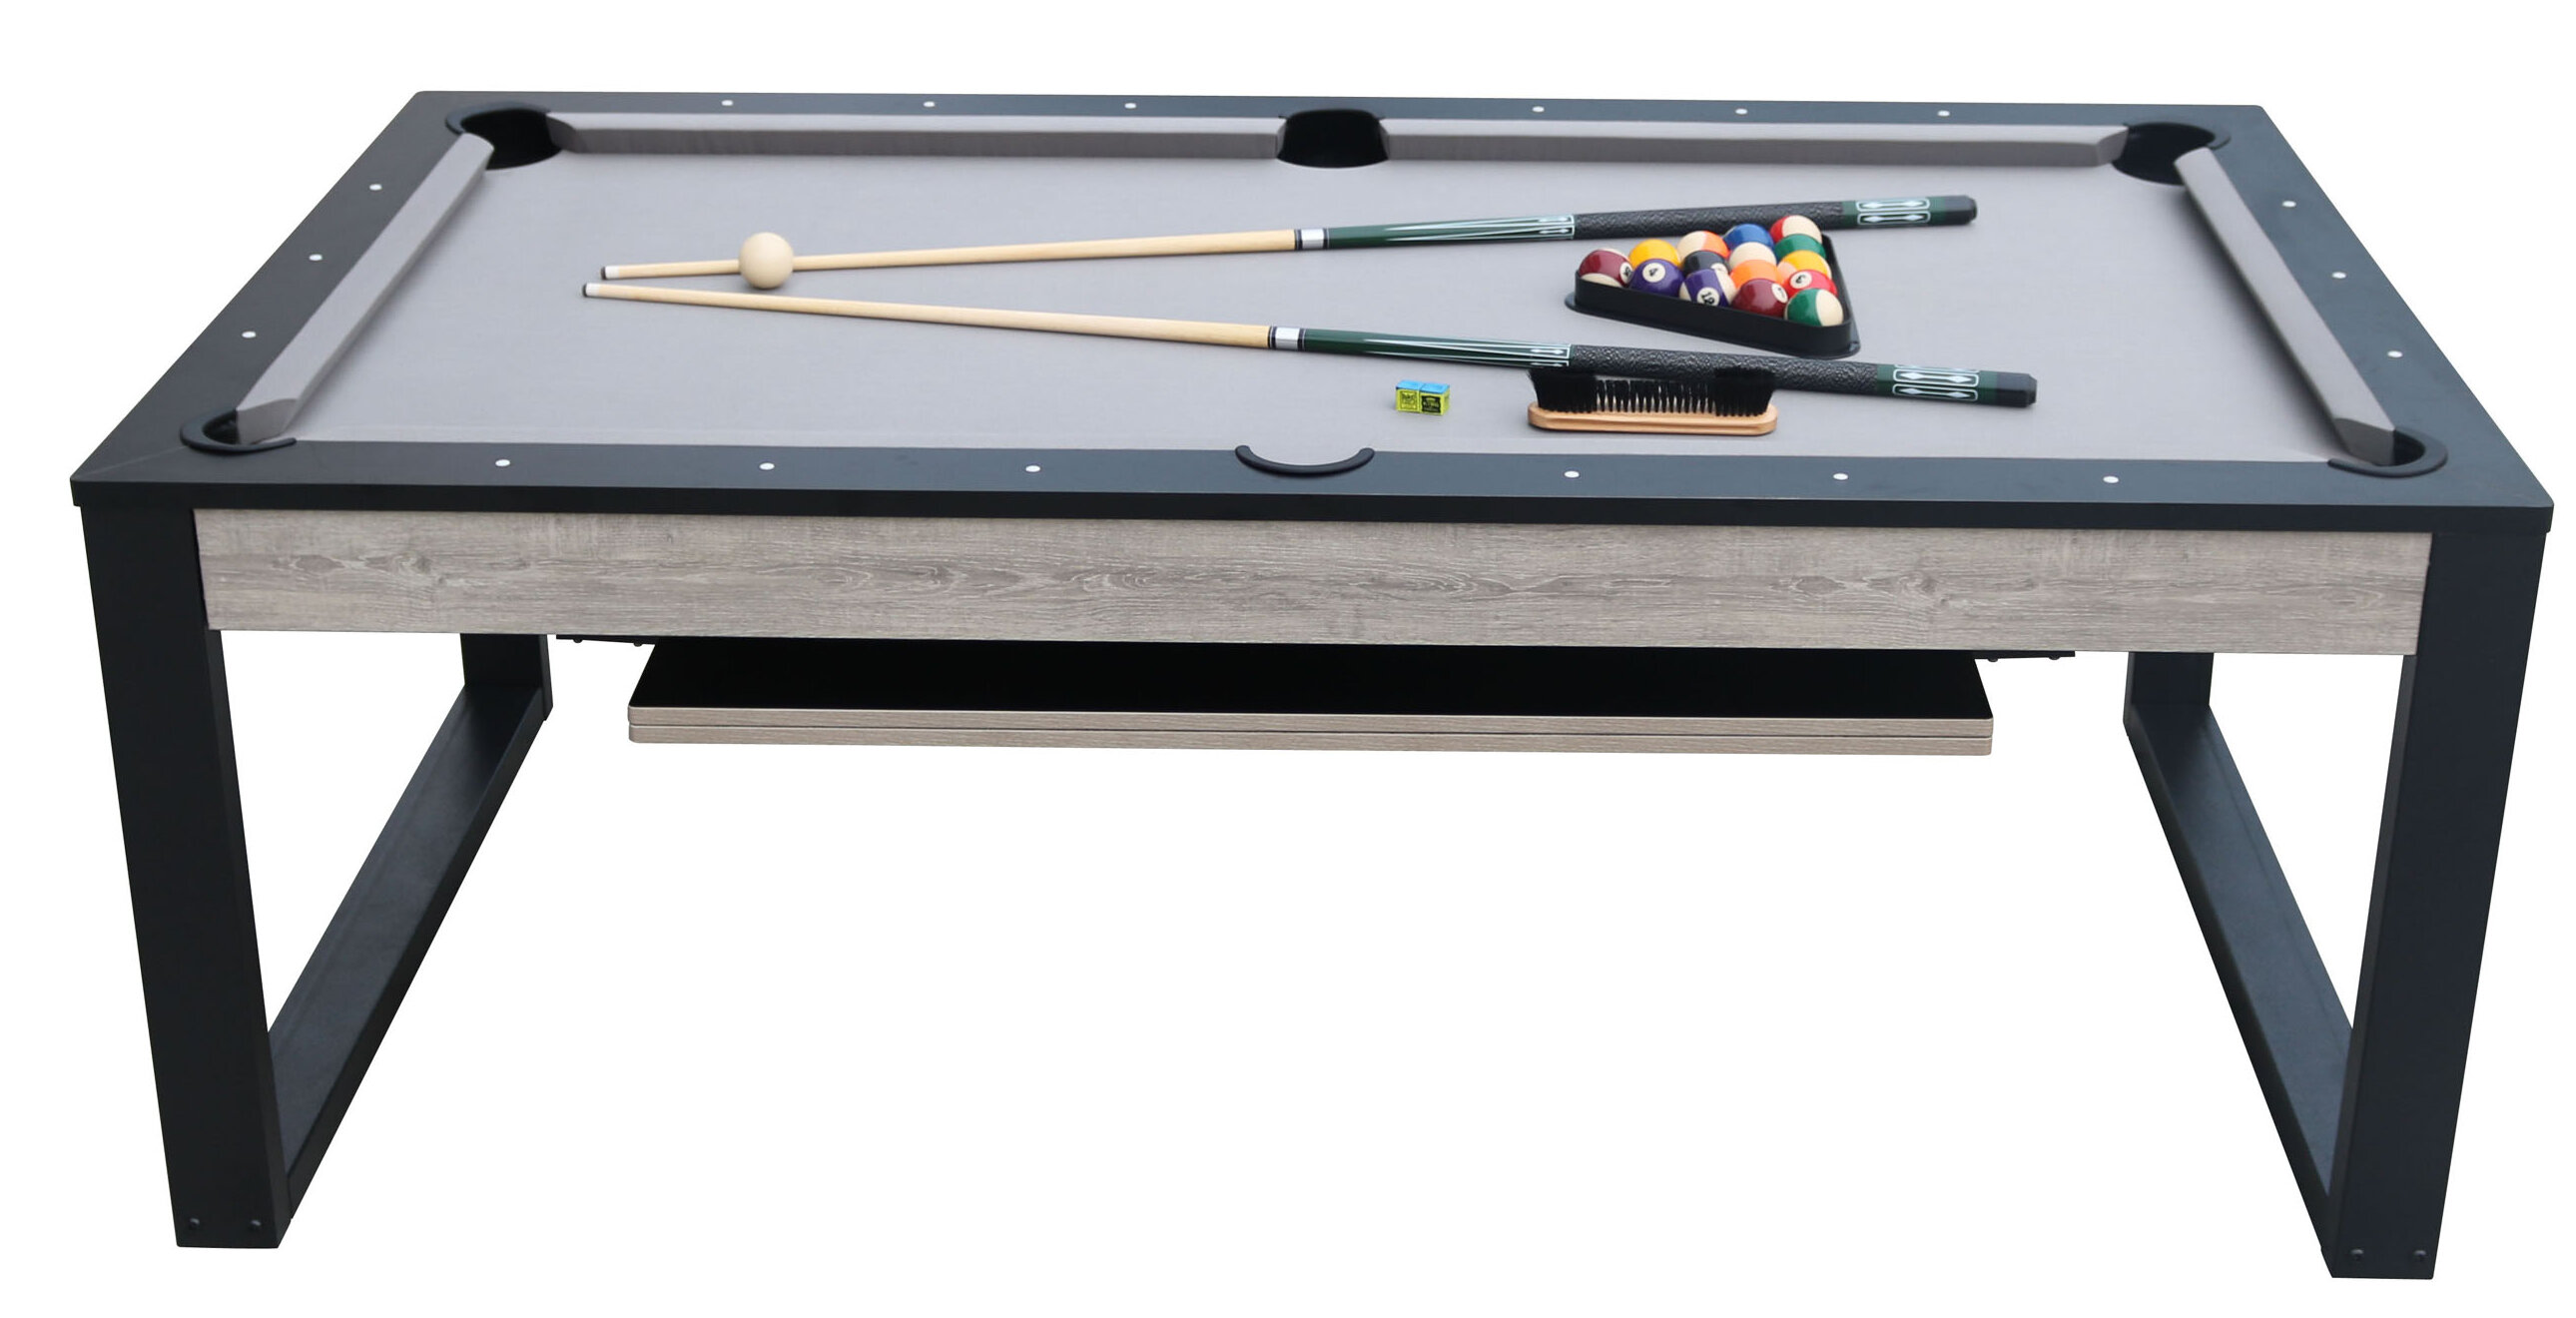 Playcraft Glacier 7 Pool Table with Dining Top